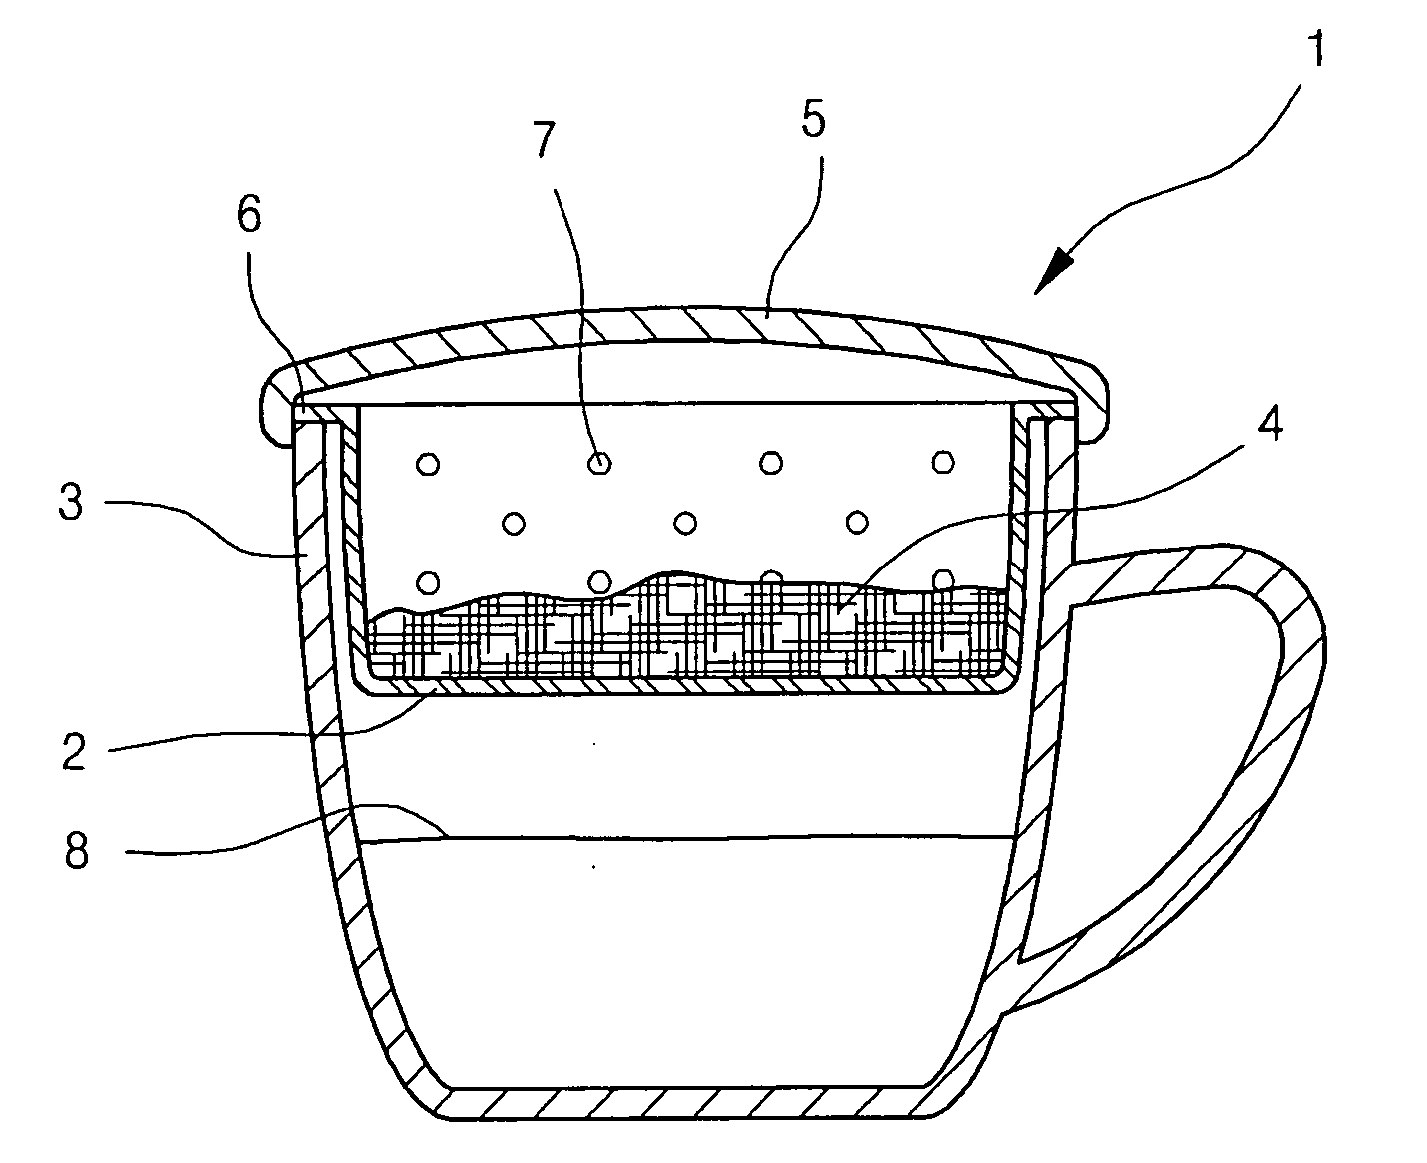 Tea vessel structure for straining out tealeaves